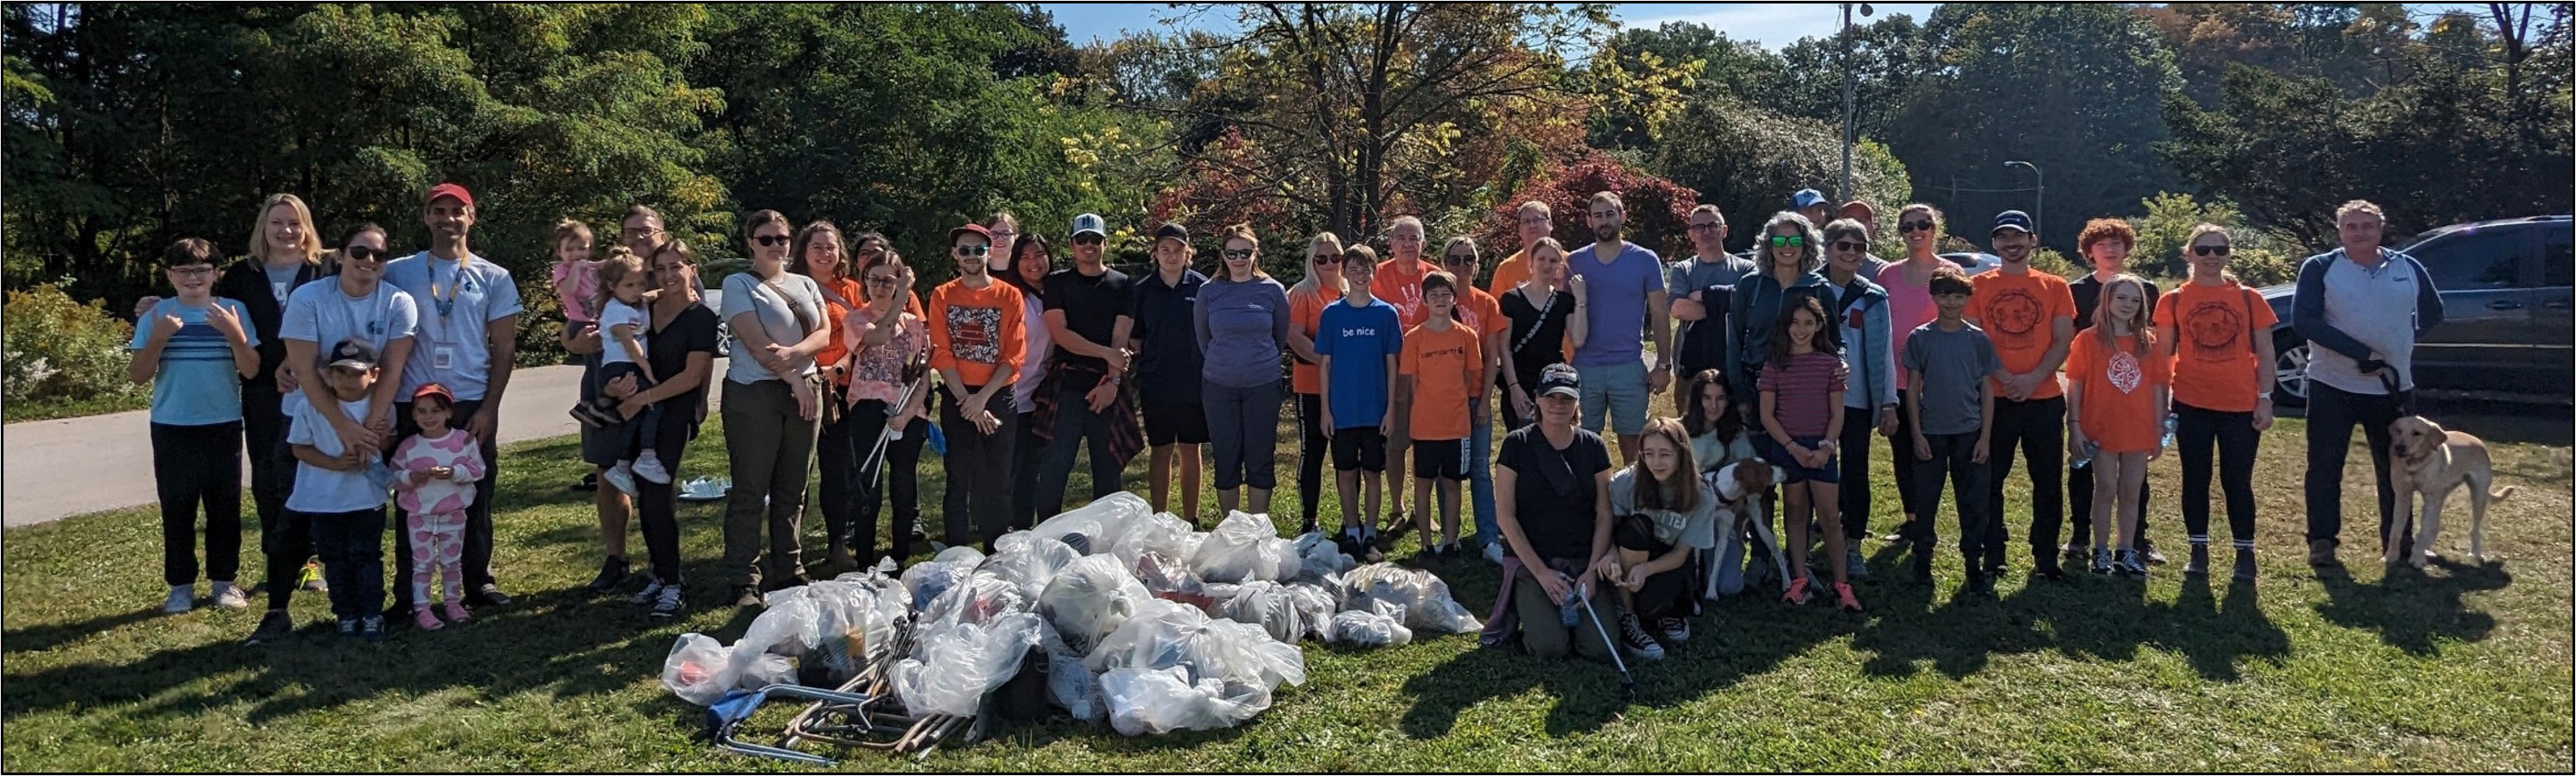 Volunteers from across LHSC, SJHC, and London Environmental Network proudly stand in front of the garbage they cleaned up from Westminster Ponds